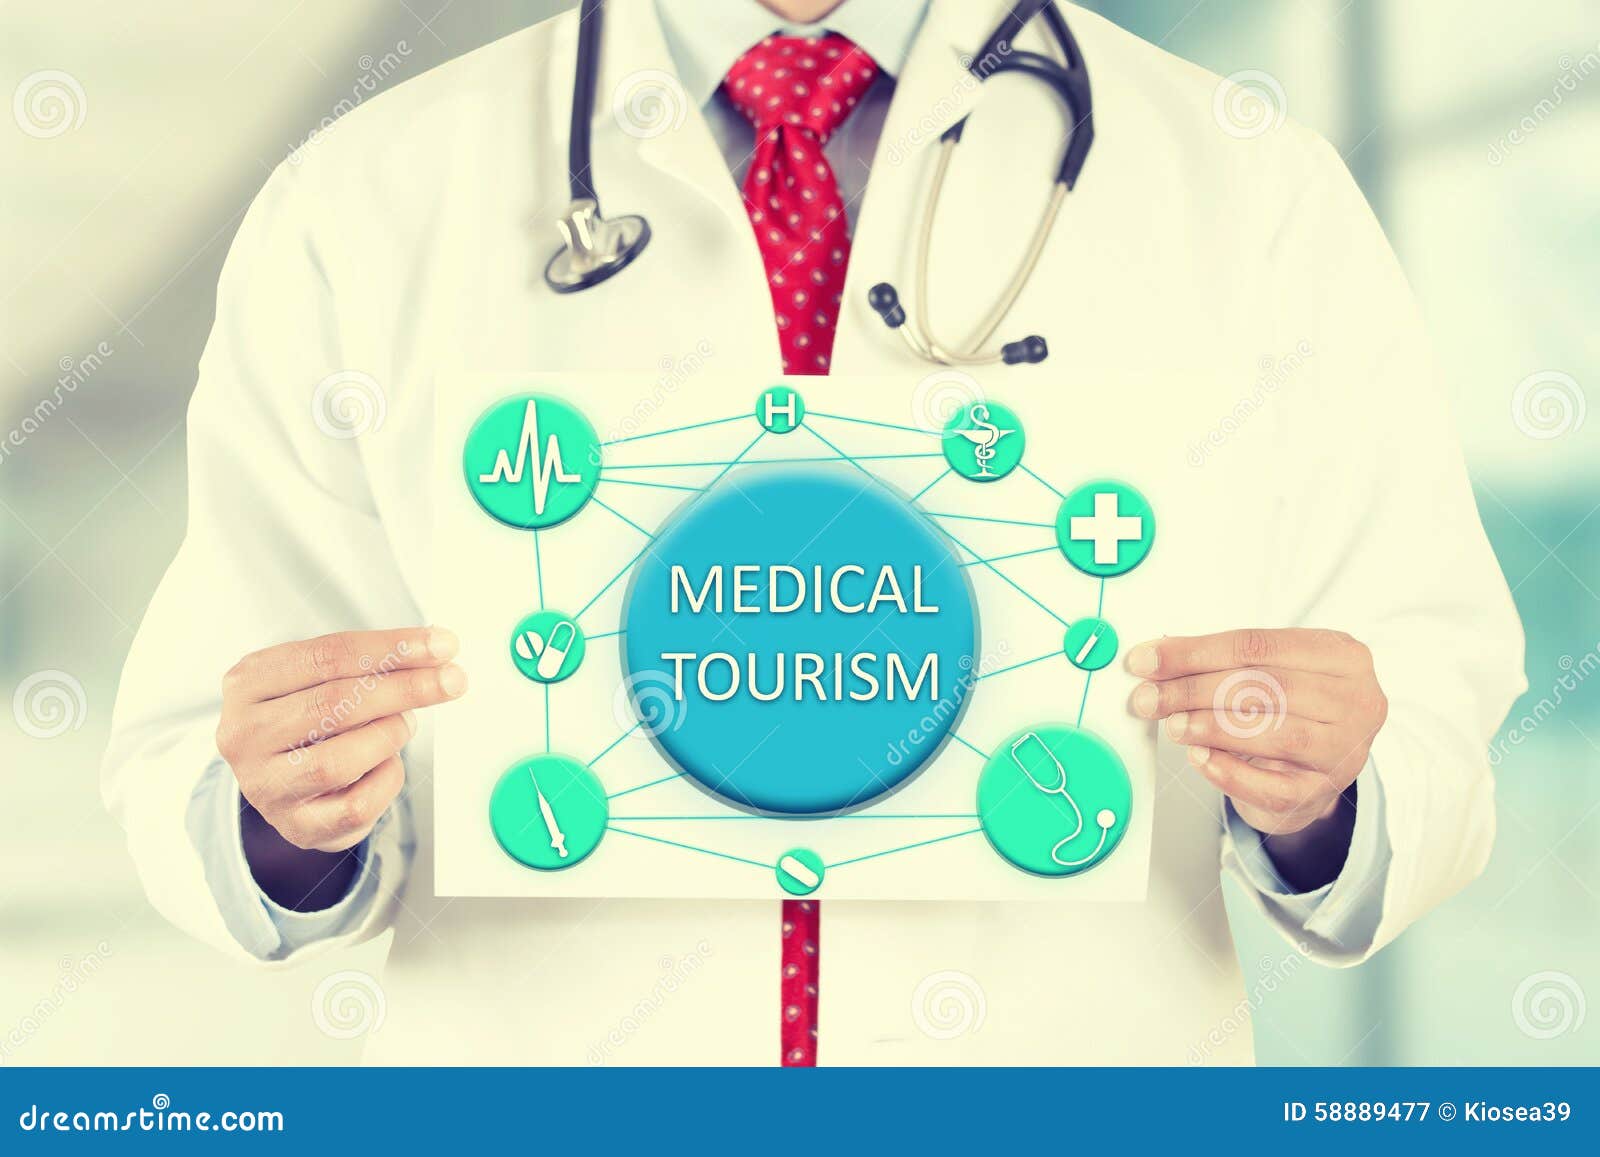 doctor hands holding card sign with medical tourism message